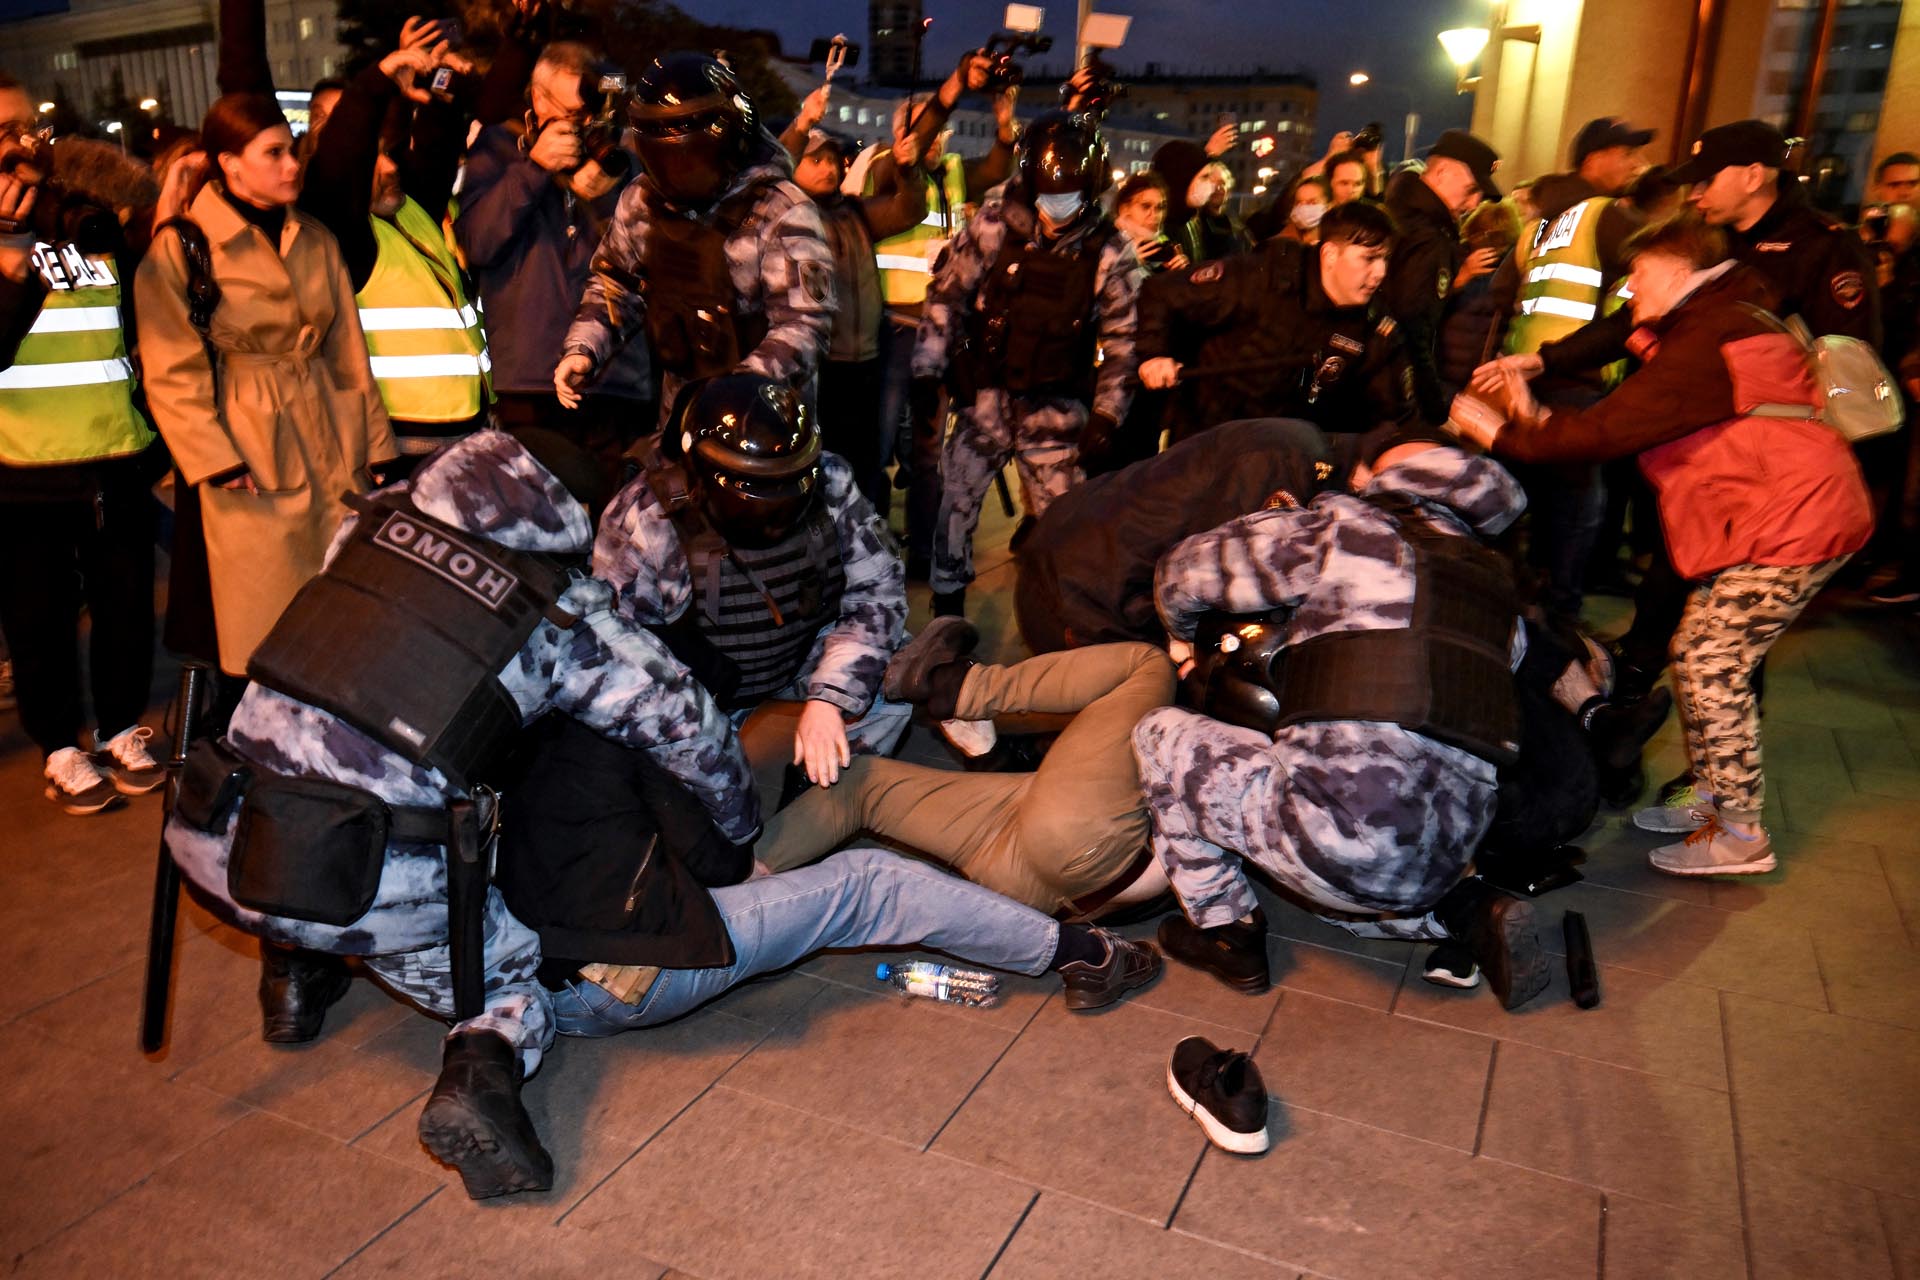 A group tries to resist after being thrown to the ground by officers (Photo by Alexander NEMENOV / AFP)